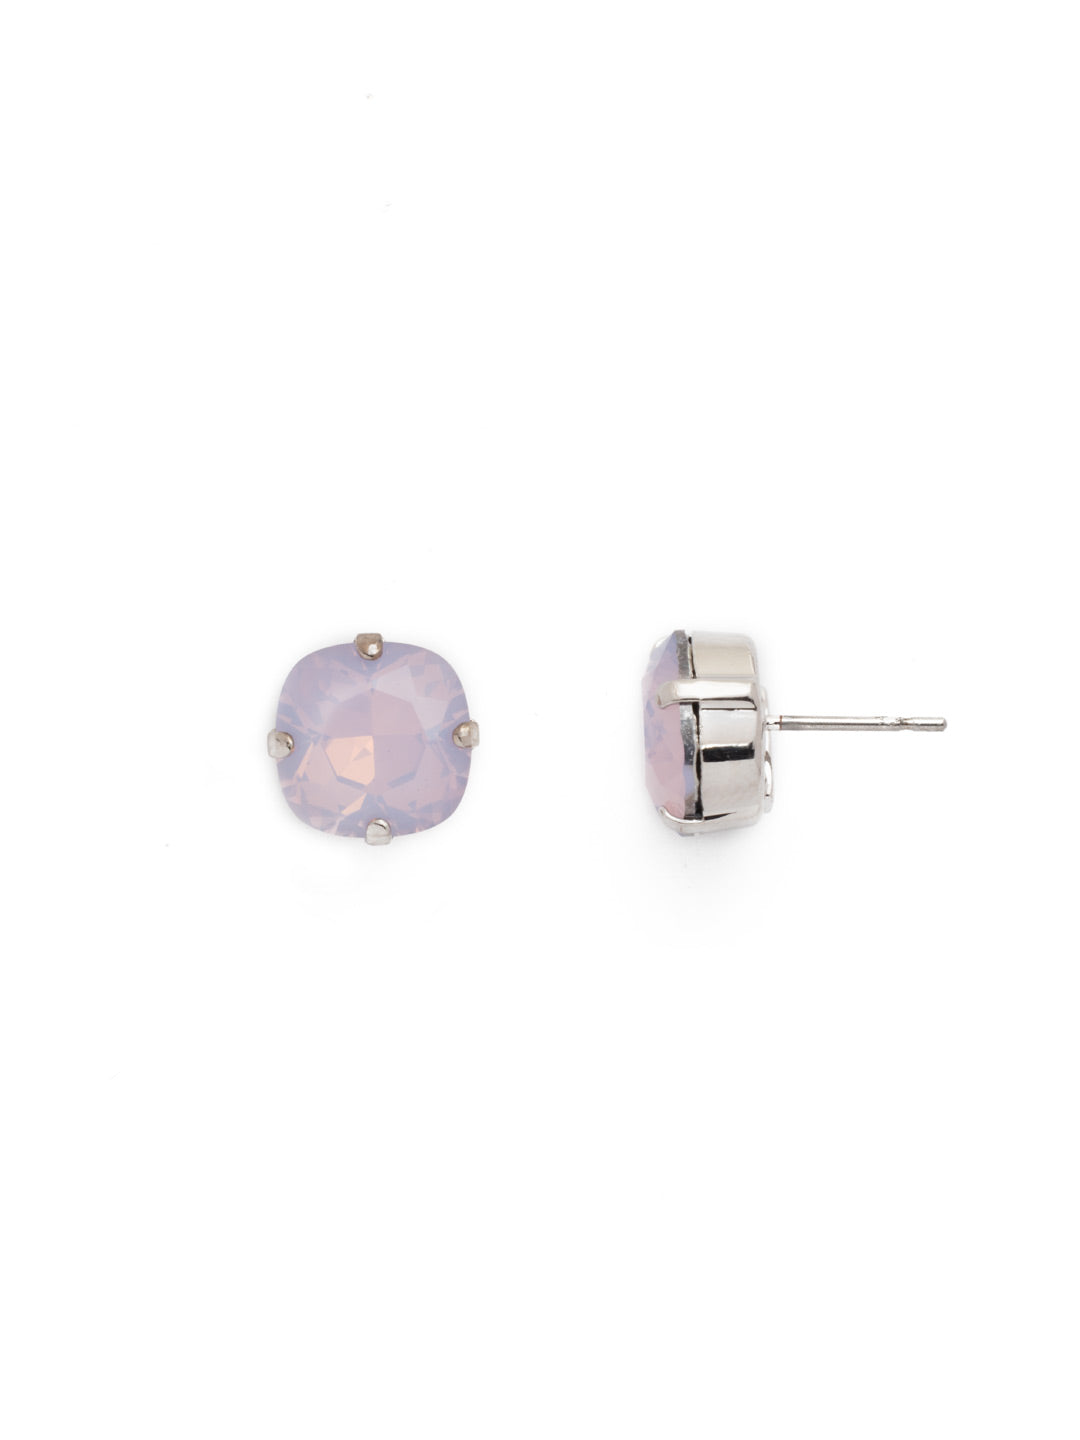 Halcyon Stud Earrings - EDH25RHROW - <p>A beautiful, luminous cushion-cut crystal in a classic four-pronged setting that's ideal for everyday wear. From Sorrelli's Rose Water collection in our Palladium Silver-tone finish.</p>